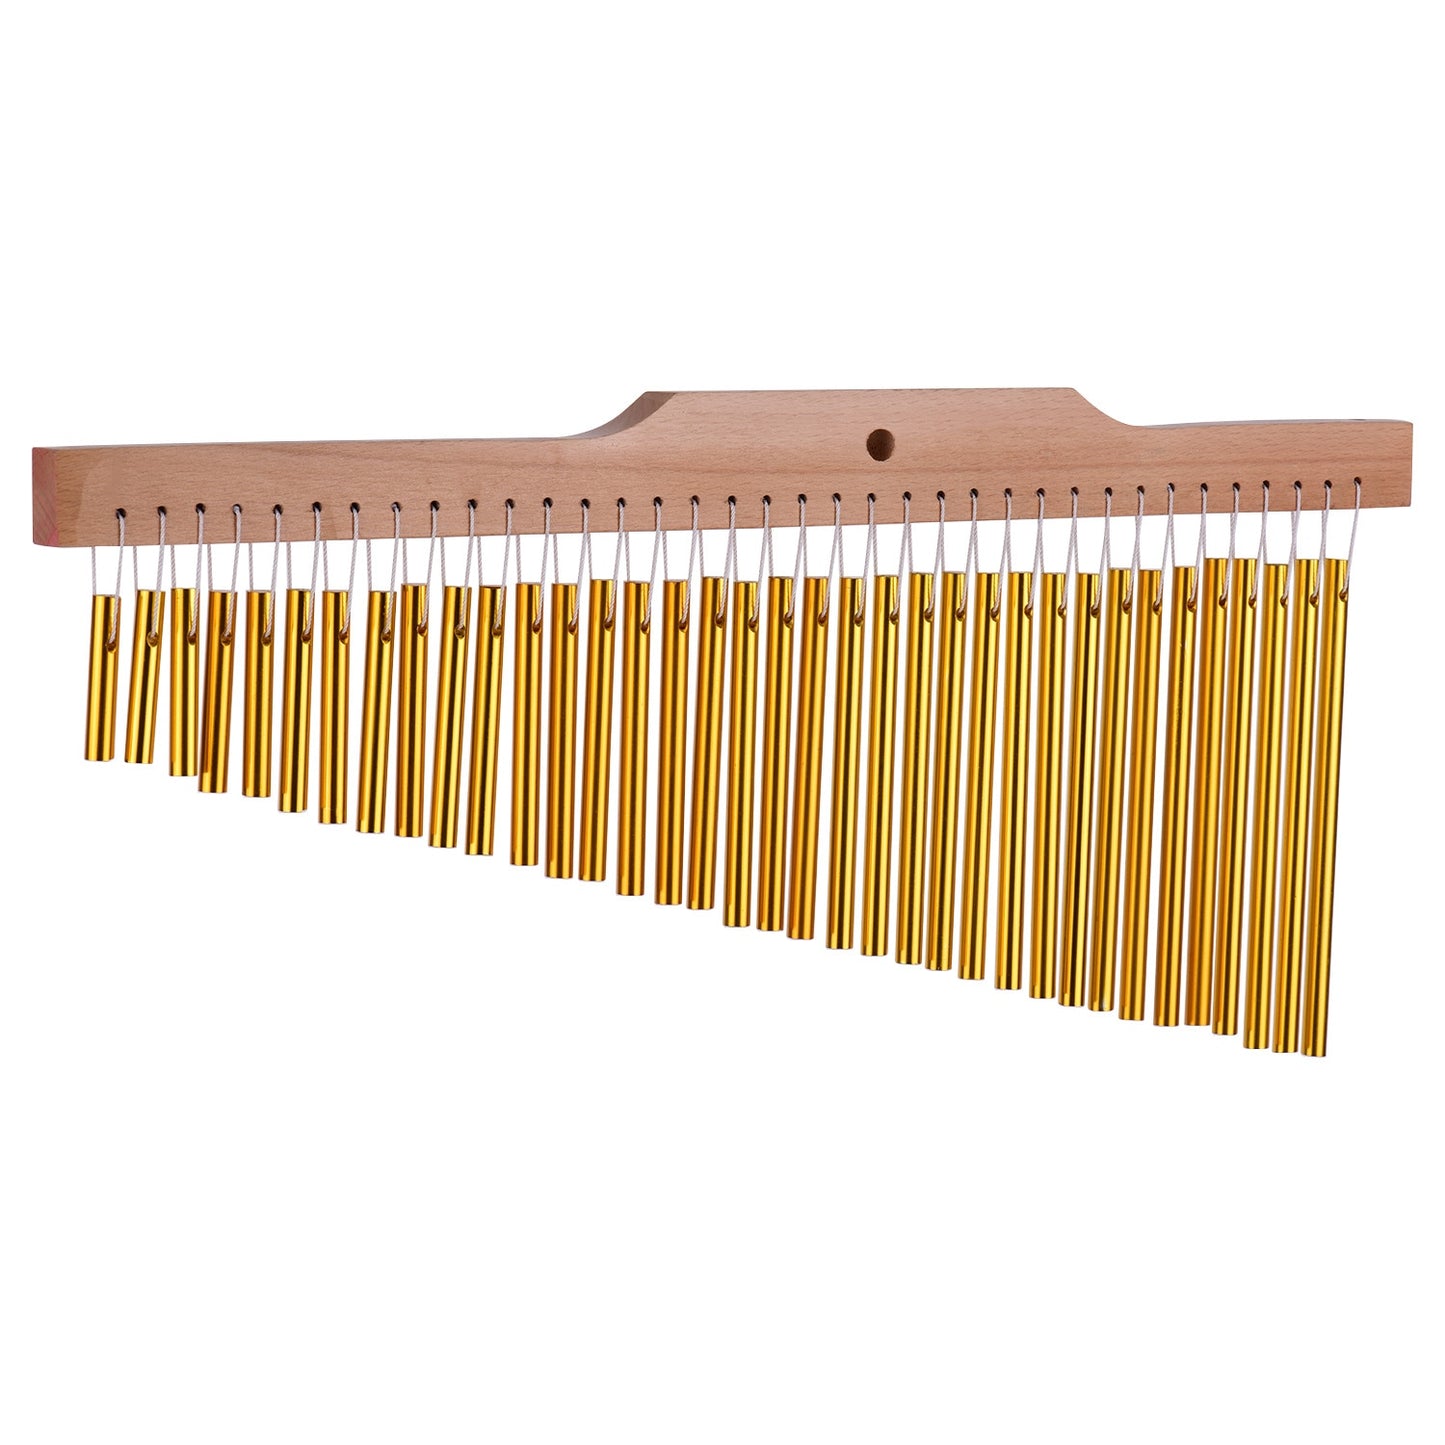 36 Bar Chimes Gold Aluminum Alloy Wooden Bar Percussion Instrument Musical instrument toys